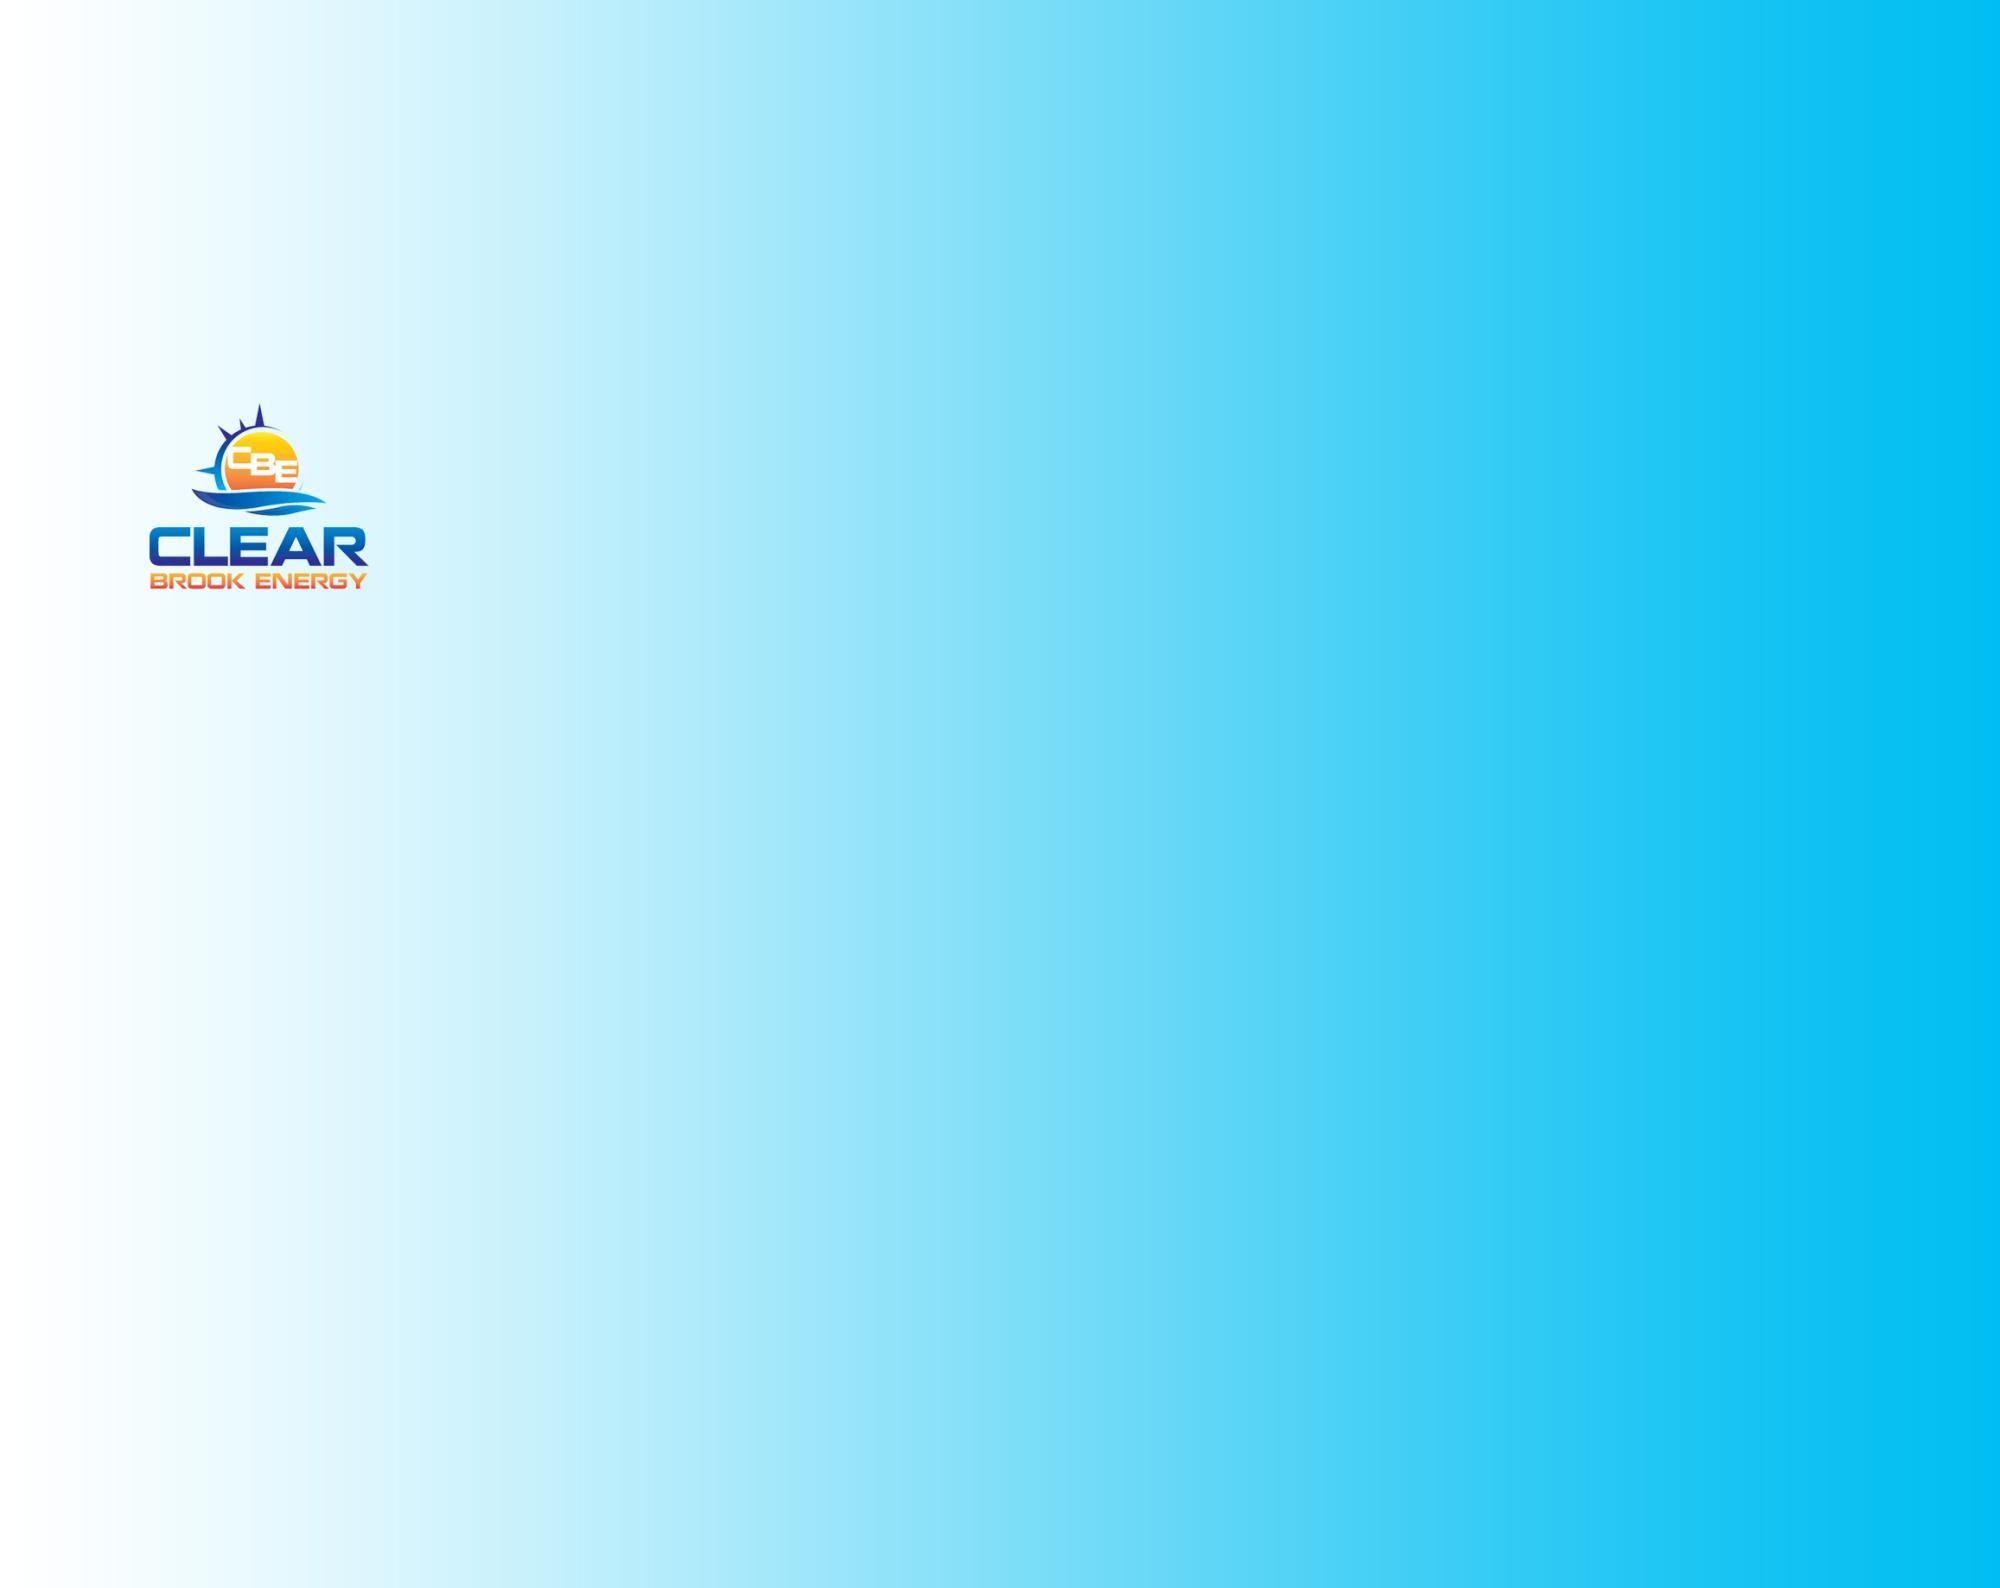 Clearbrook Logo - Clear Brook Energy